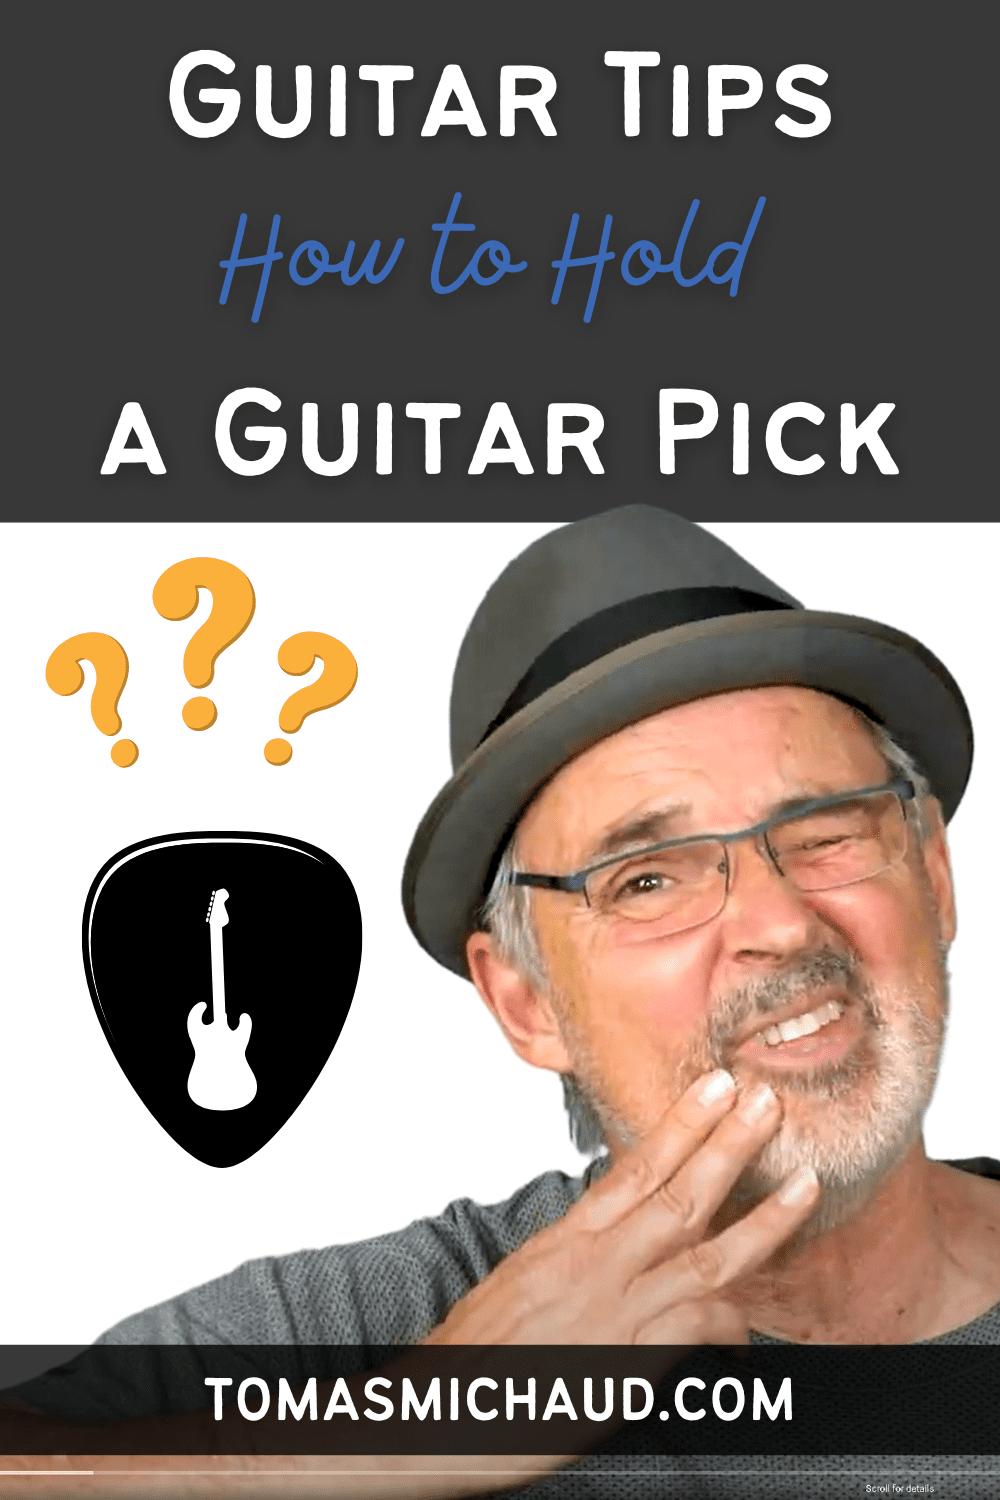 How to Hold a Guitar Pick